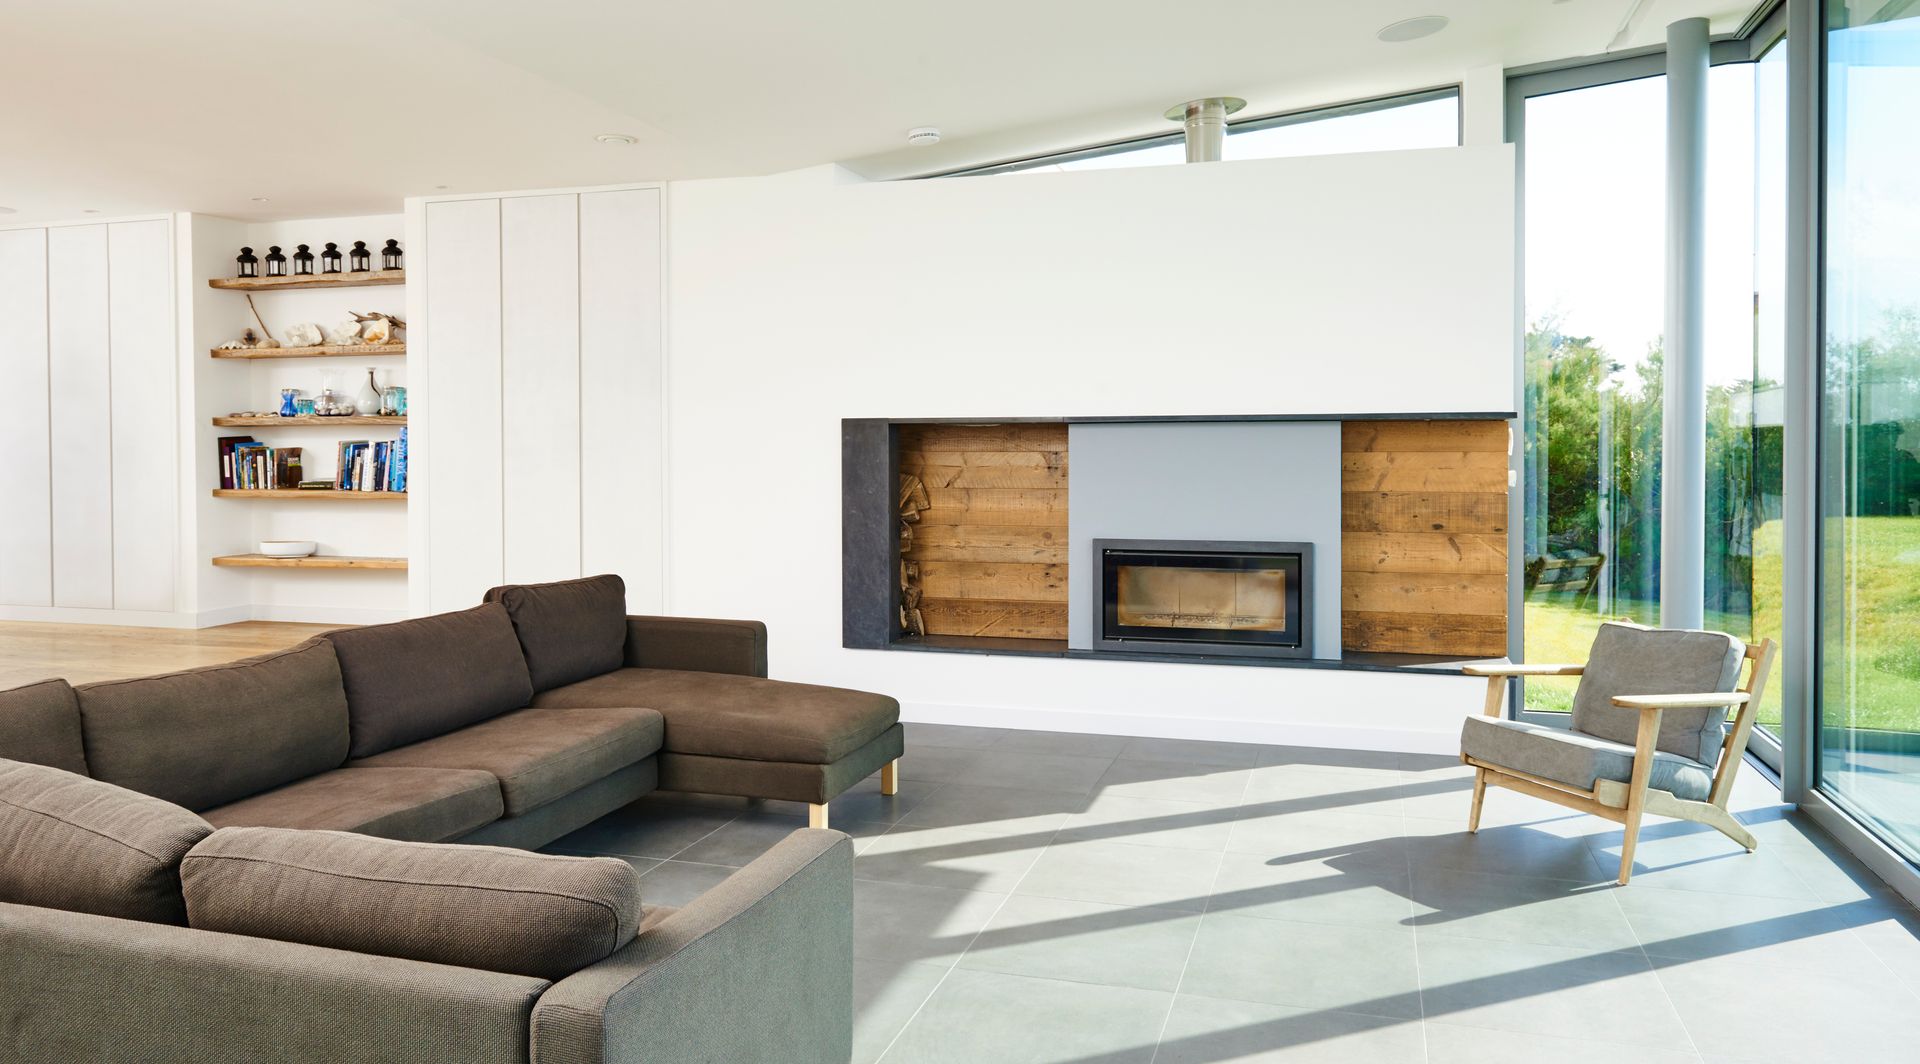 Sandhills Living Room and Fireplace Barc Architects Nowoczesny salon